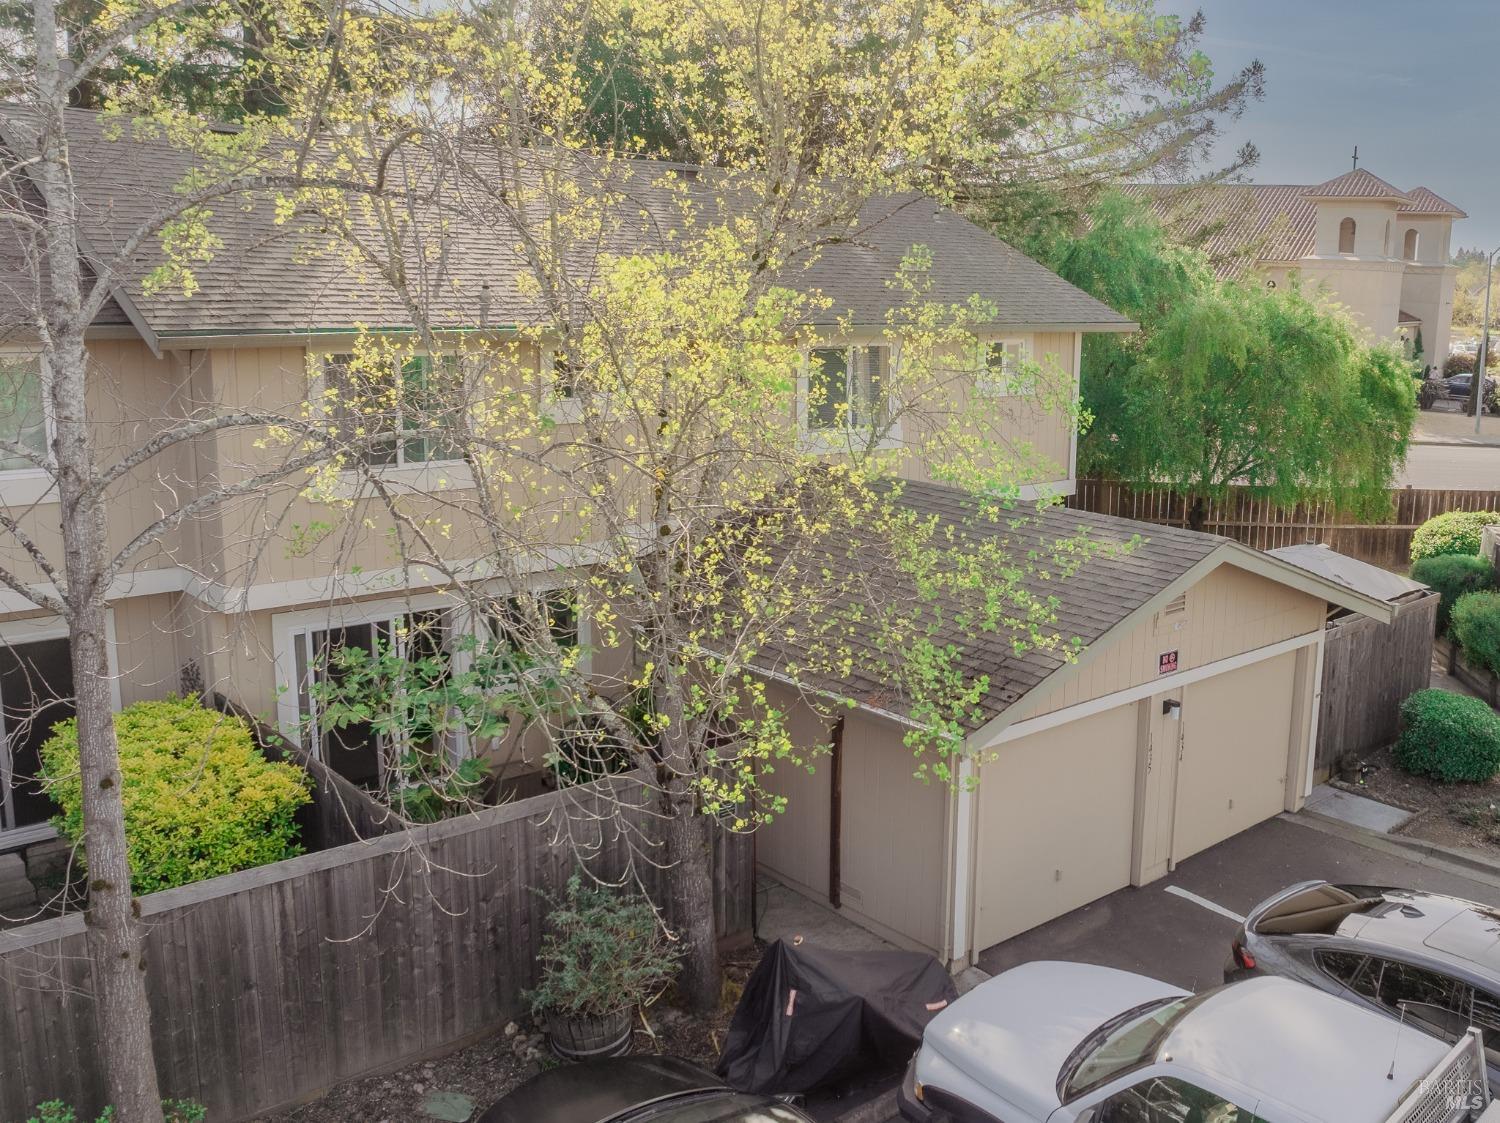 Photo of 1435 Gold Wy in Rohnert Park, CA